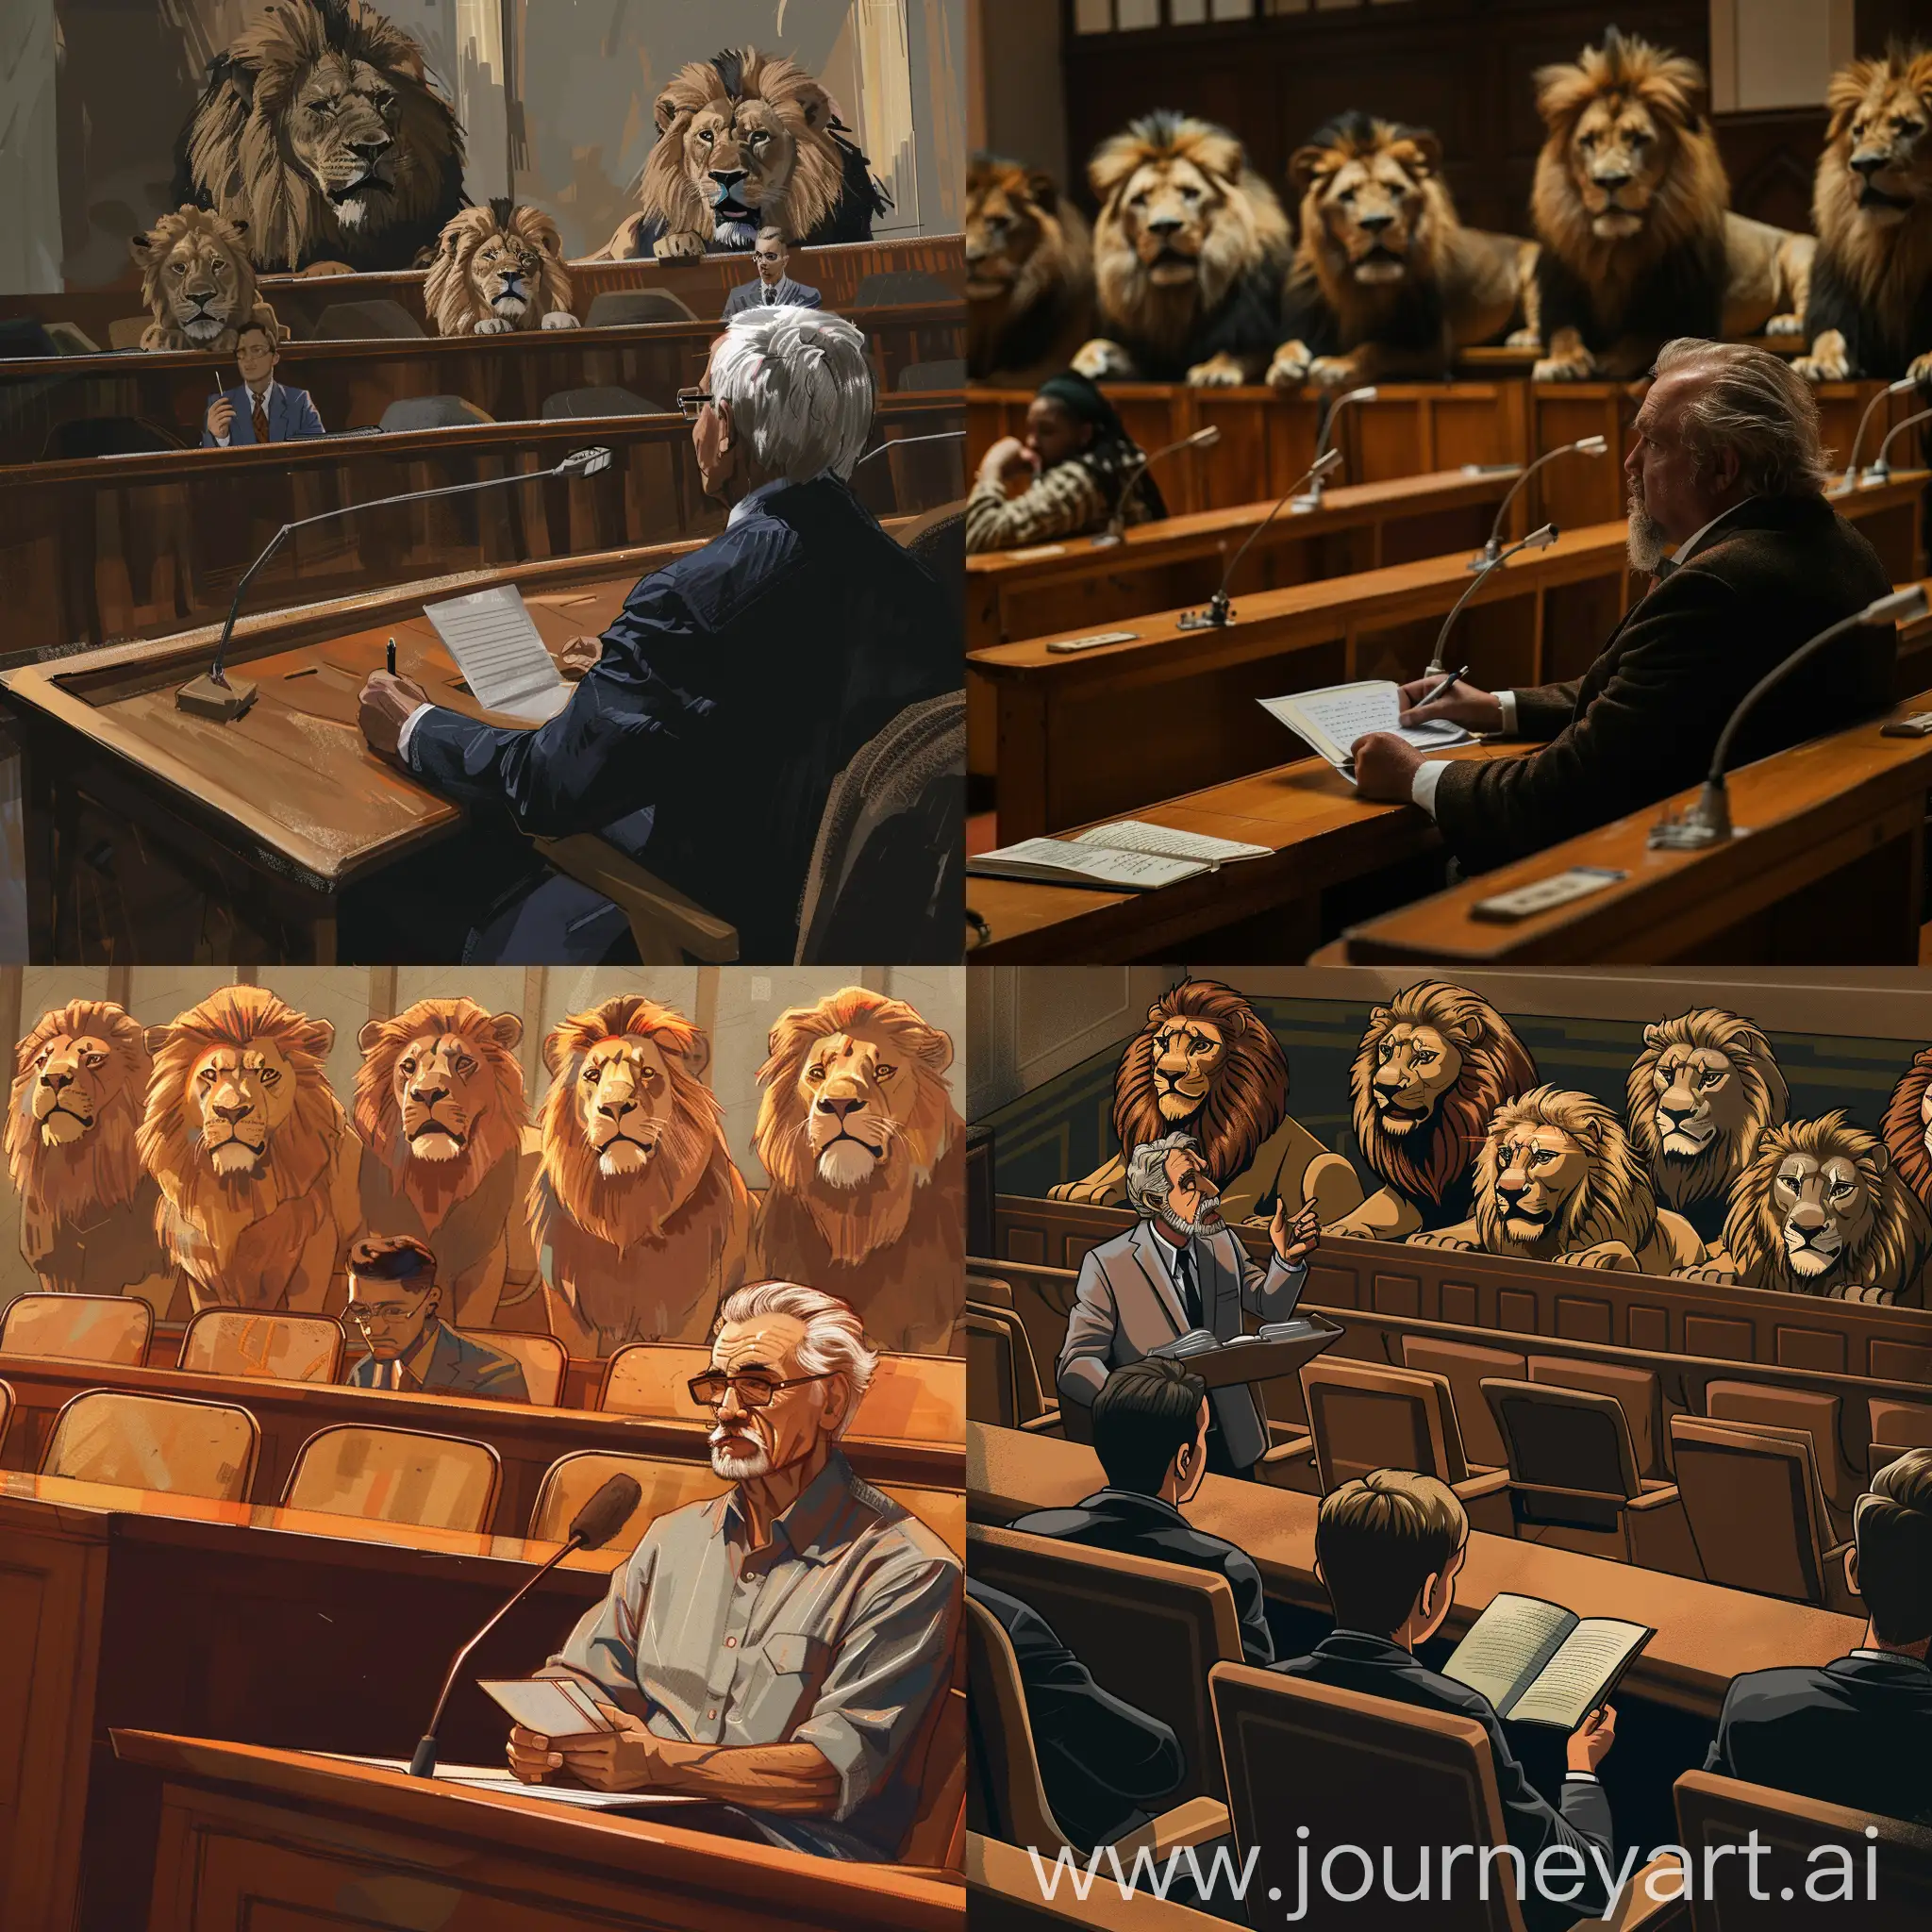 a professor teaching at a university hall with lions behinds the seats, listening carefully and taking notes
